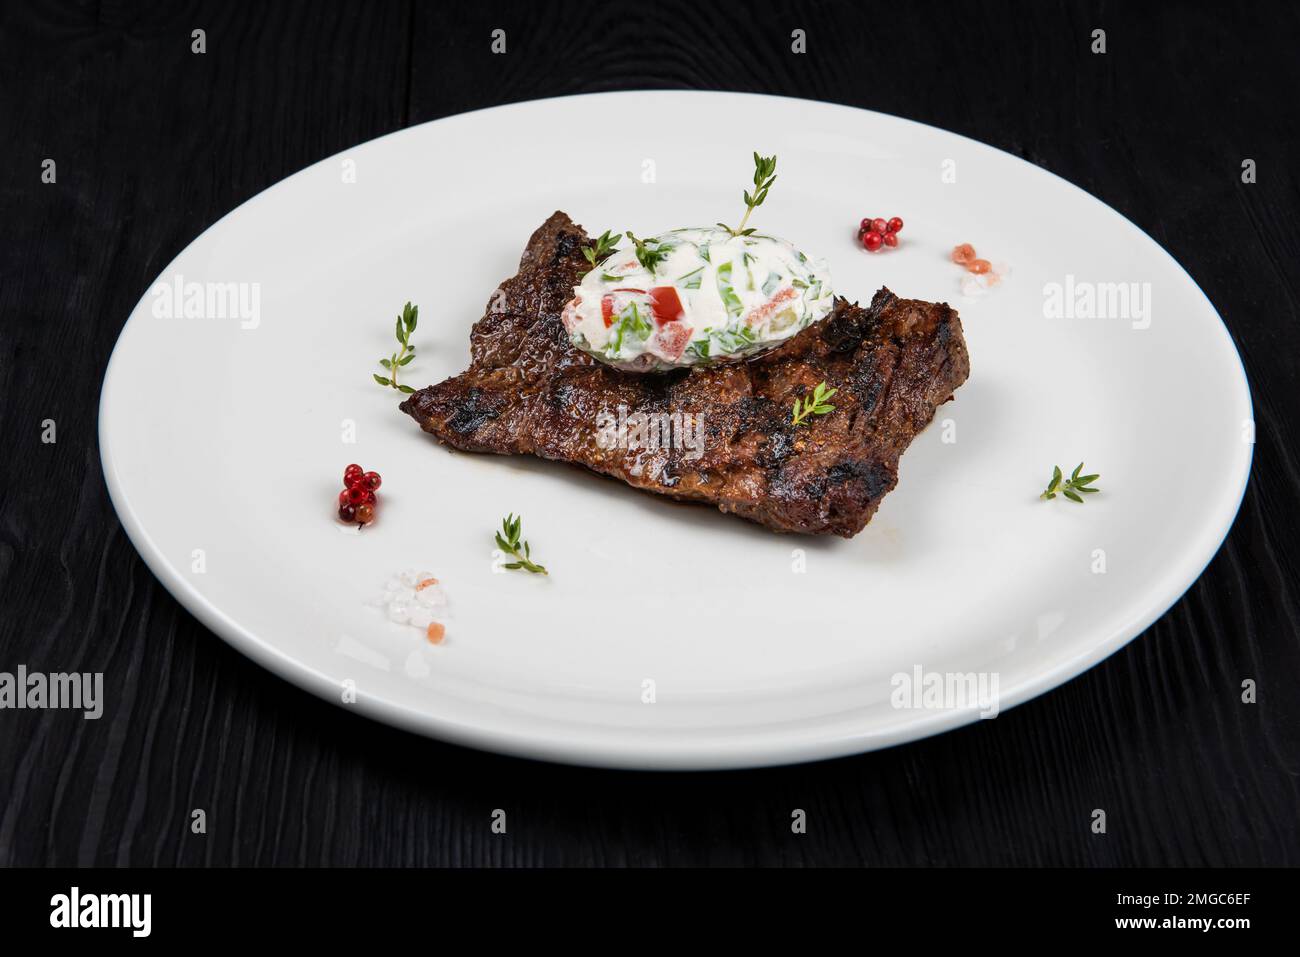 Grilled skirt beef meat steak on a plate with white vegetable sauce decorated by herbs and berries. Dark wooden background Stock Photo